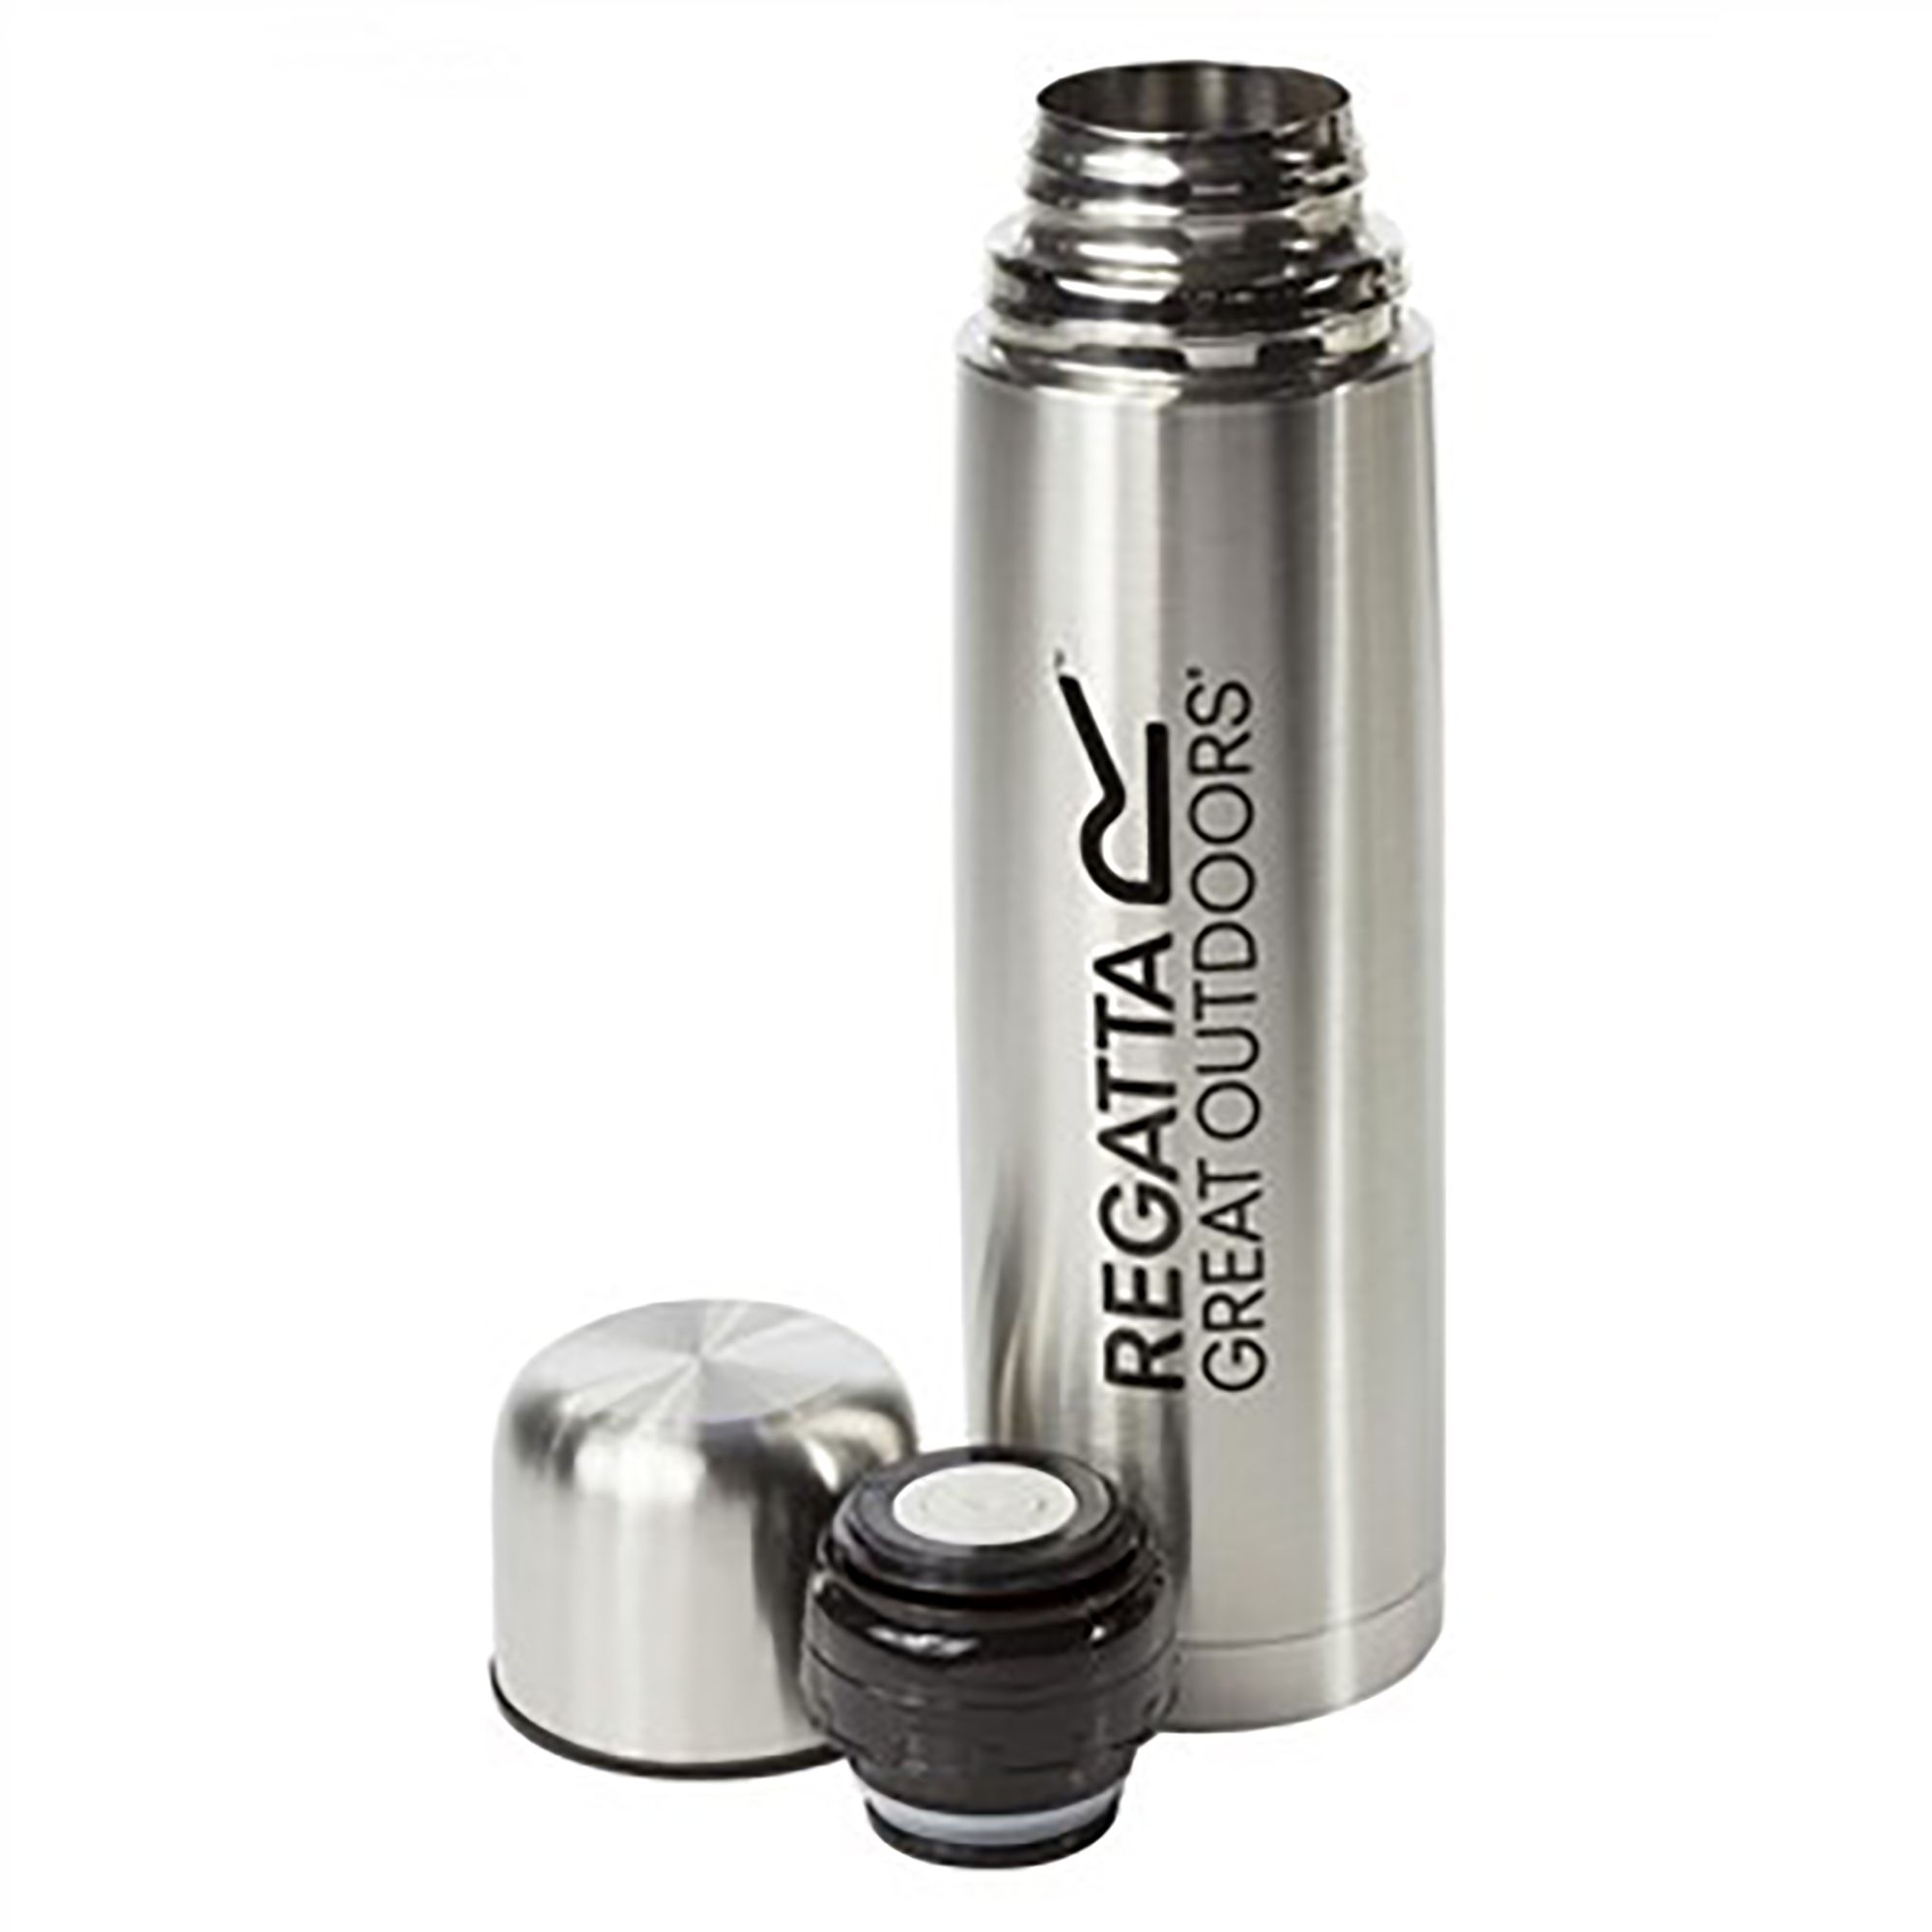 The Regatta 0.5 litre Vacuum Flask keeps hot drinks hot and cold drinks cold (it does this by creating an airless vacuum space between the two walls). Perfect for a mid-walk cup of tea. 100% Stainless Steel.